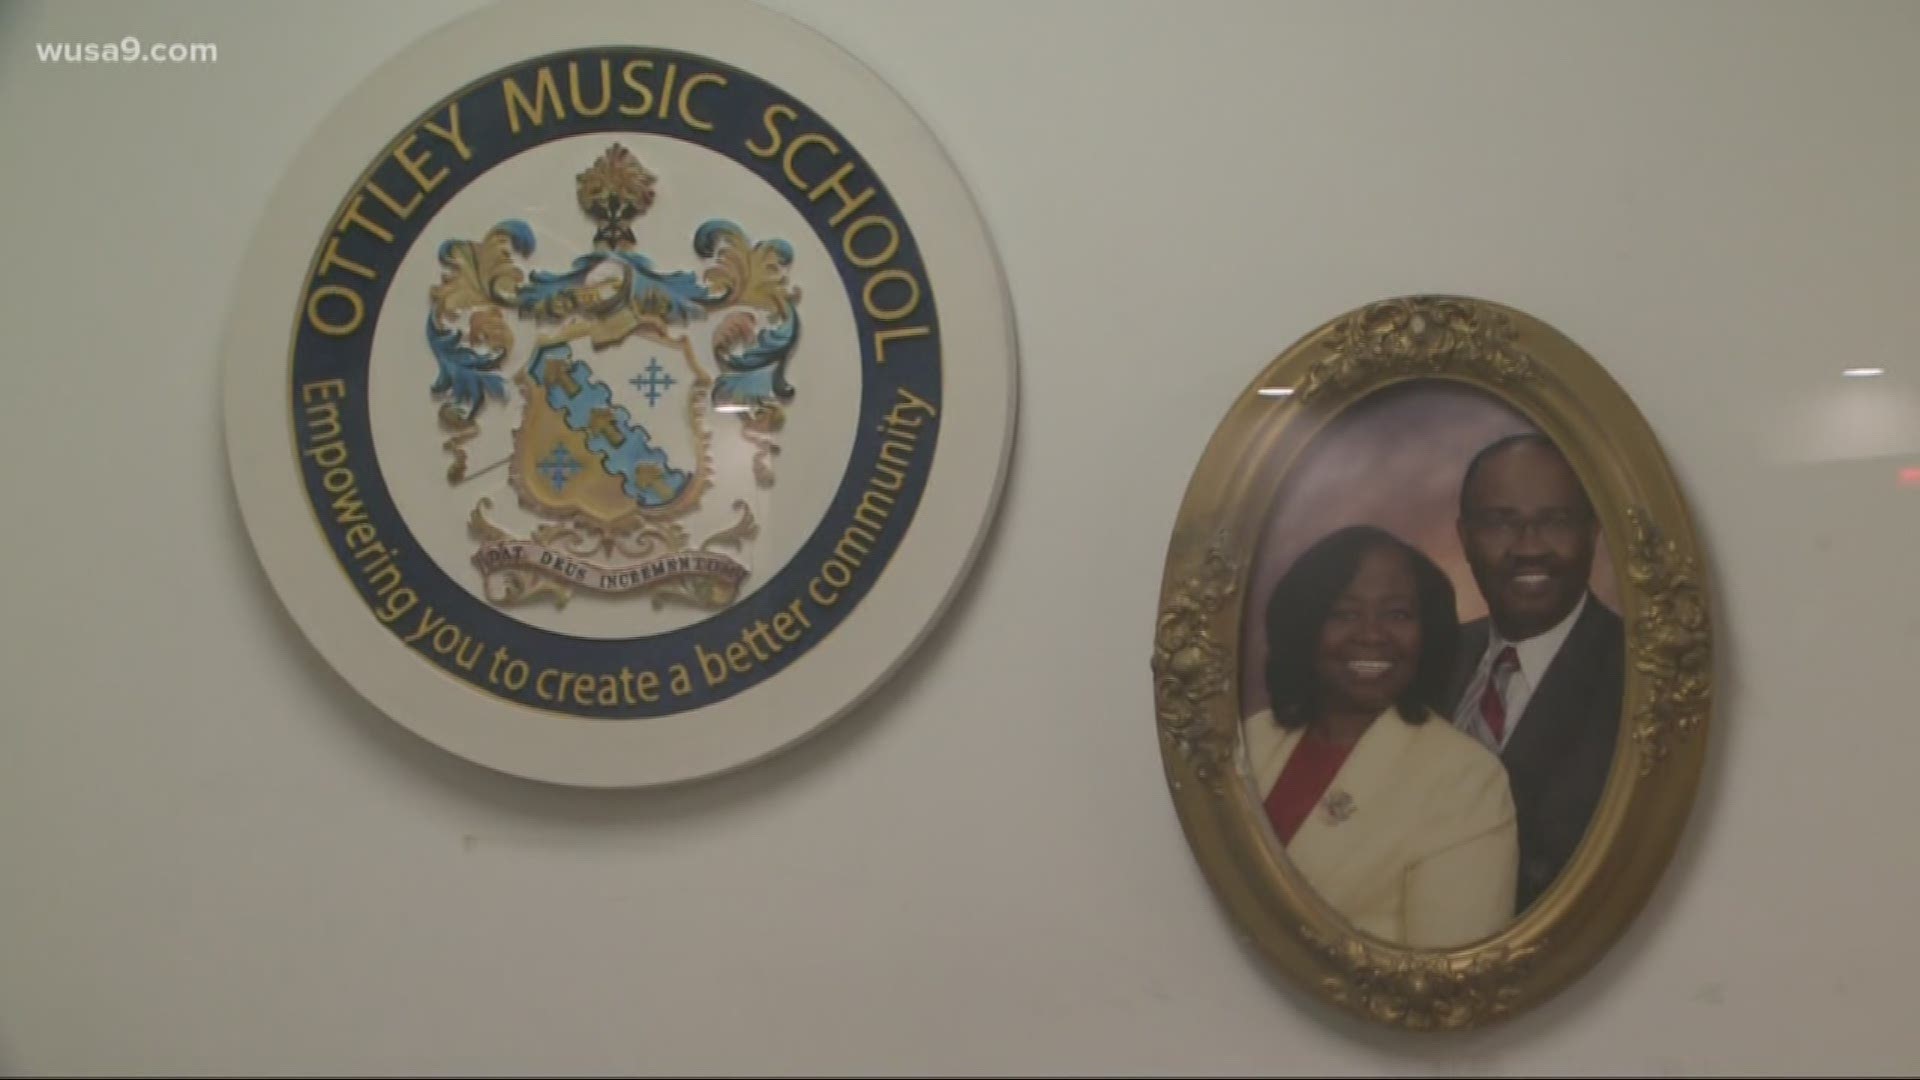 A 45-year old music school that's become a staple in Prince George's County. It's in danger of closing.
Jess Arnold and photojournalist Eric Jansen talked with students to get a sense of the role it plays in the community.